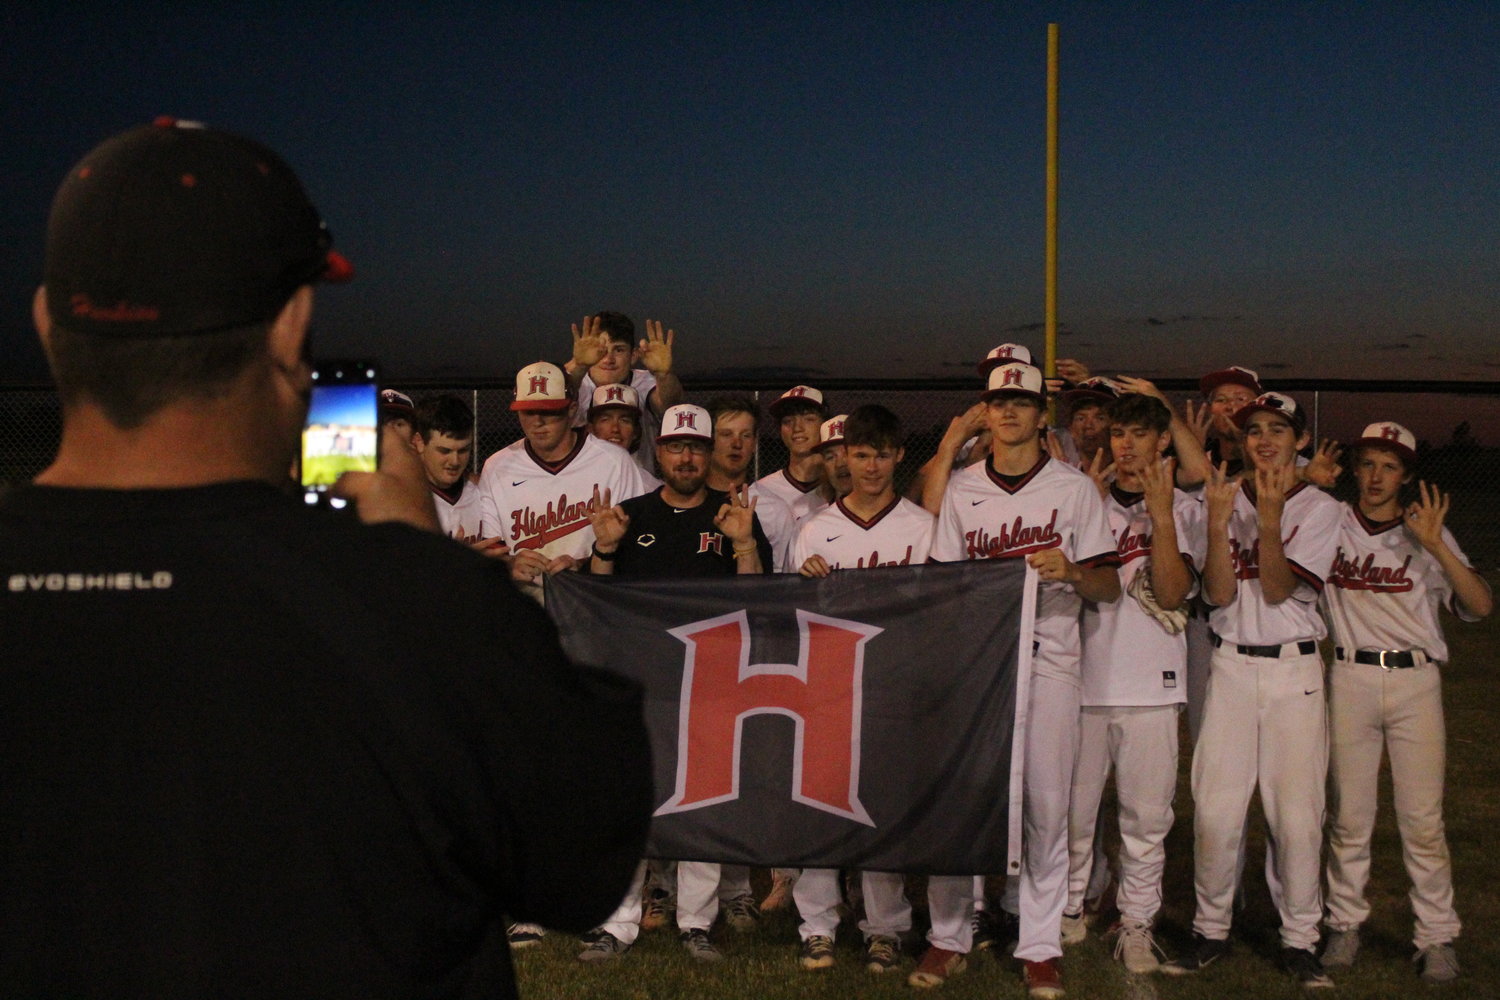 The Highland baseball team took a selfie after every win this season and posted it on social media, a tradition that bonded both the team and its community.